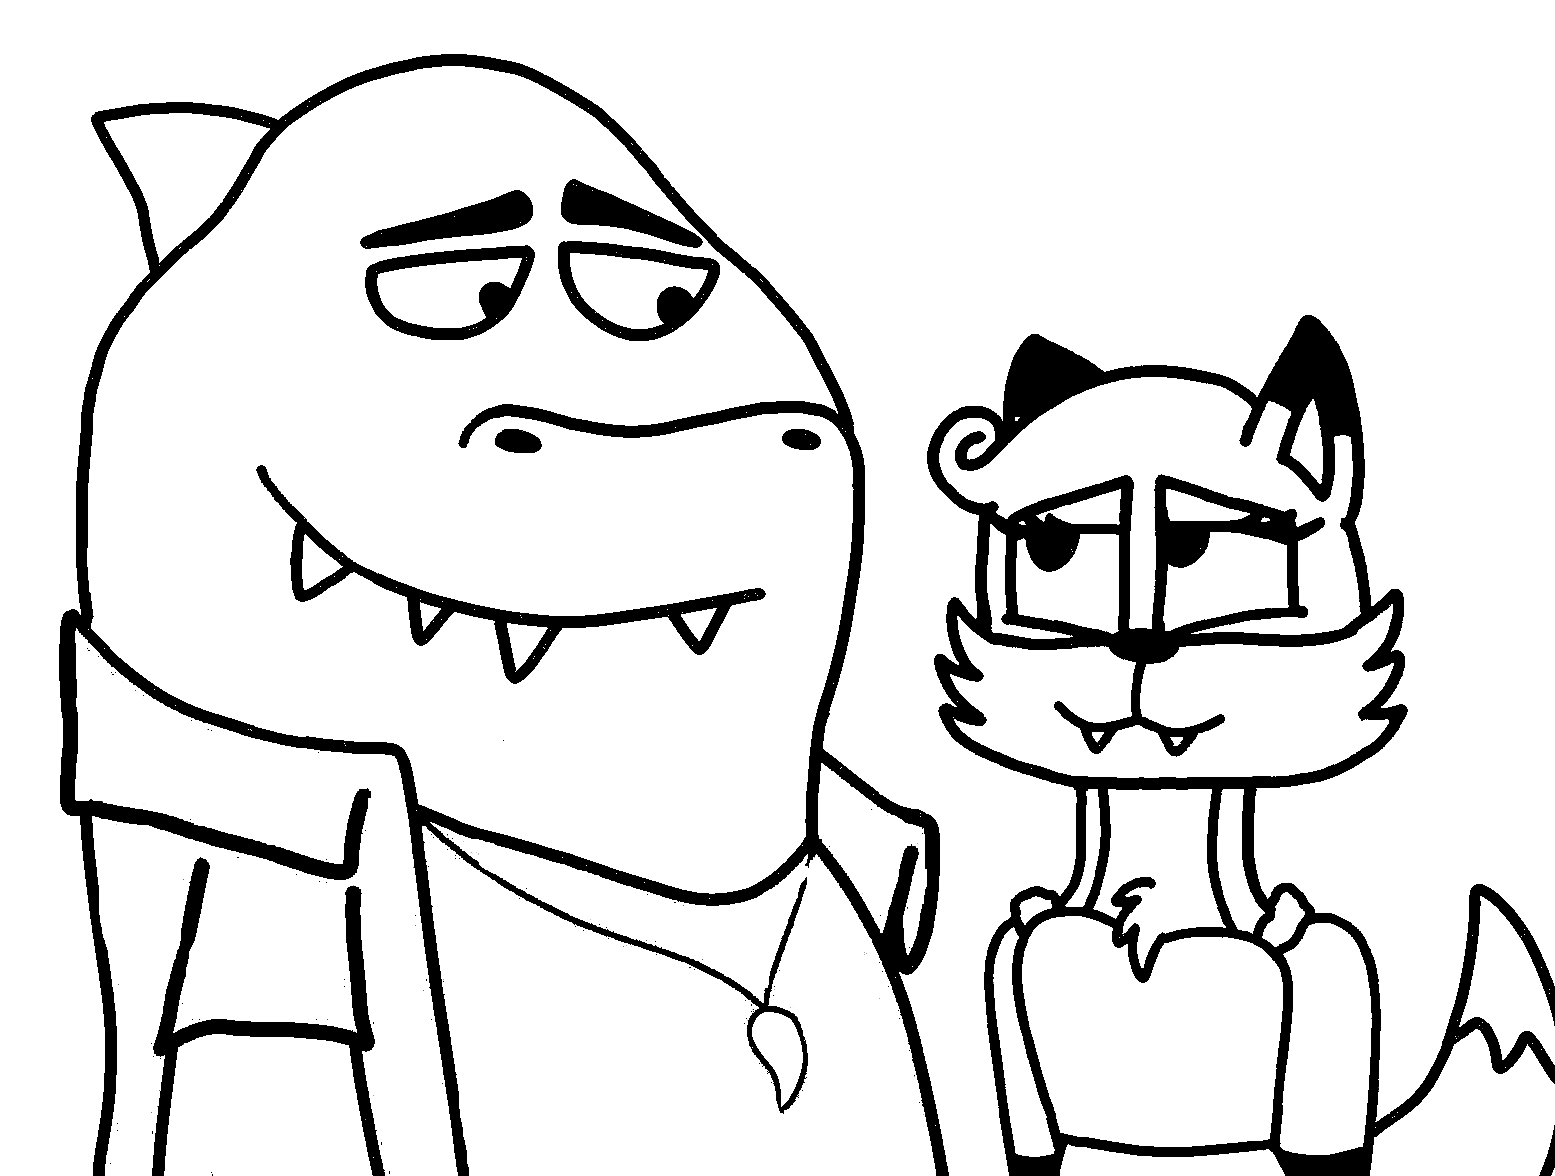 Mr Shark and Ms Foxy Coloring Page